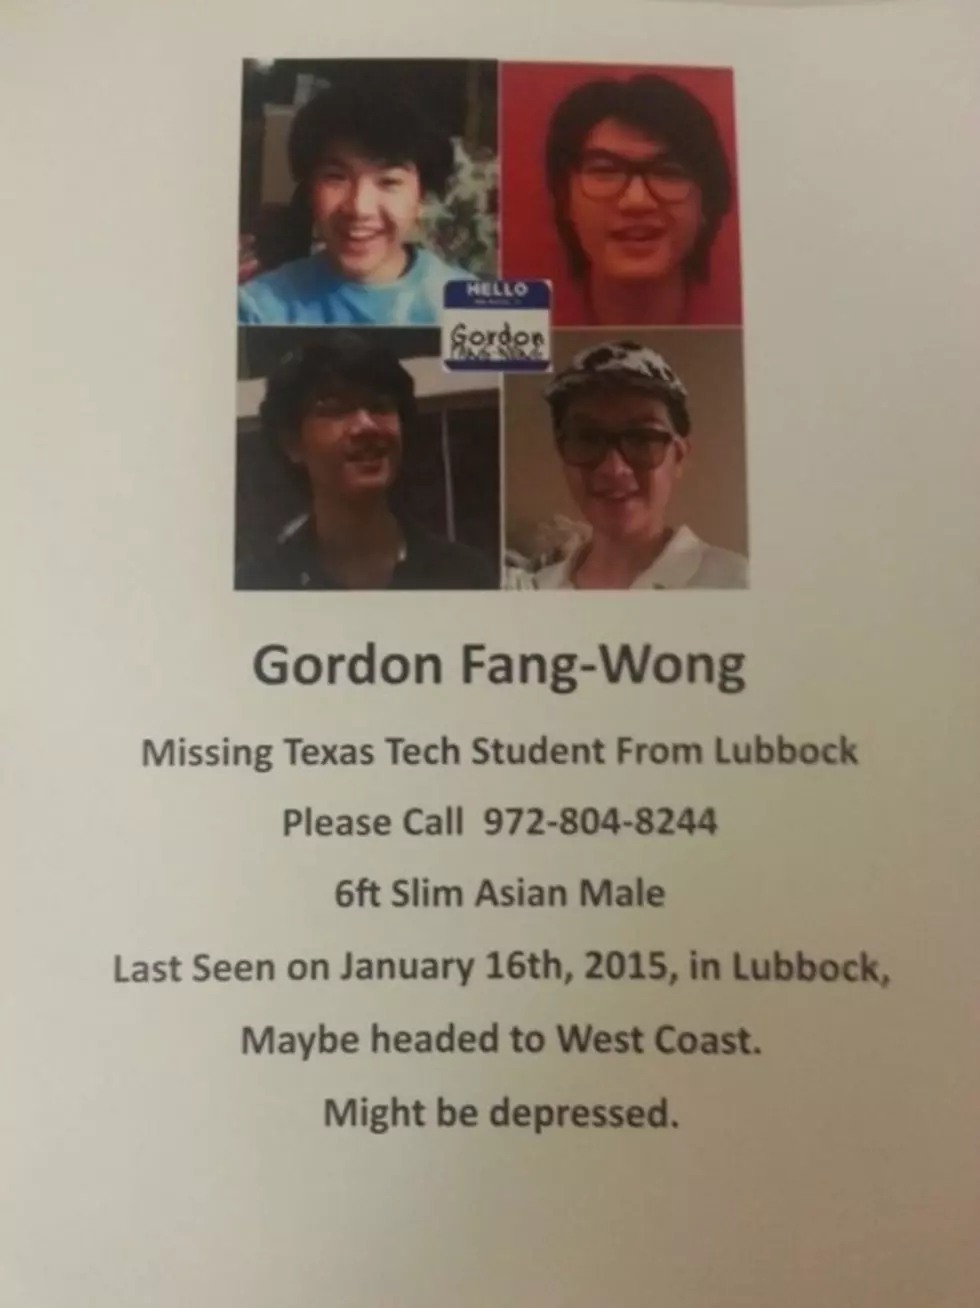 [UPDATE] Lubbock Police Searching for Missing Texas Tech Student